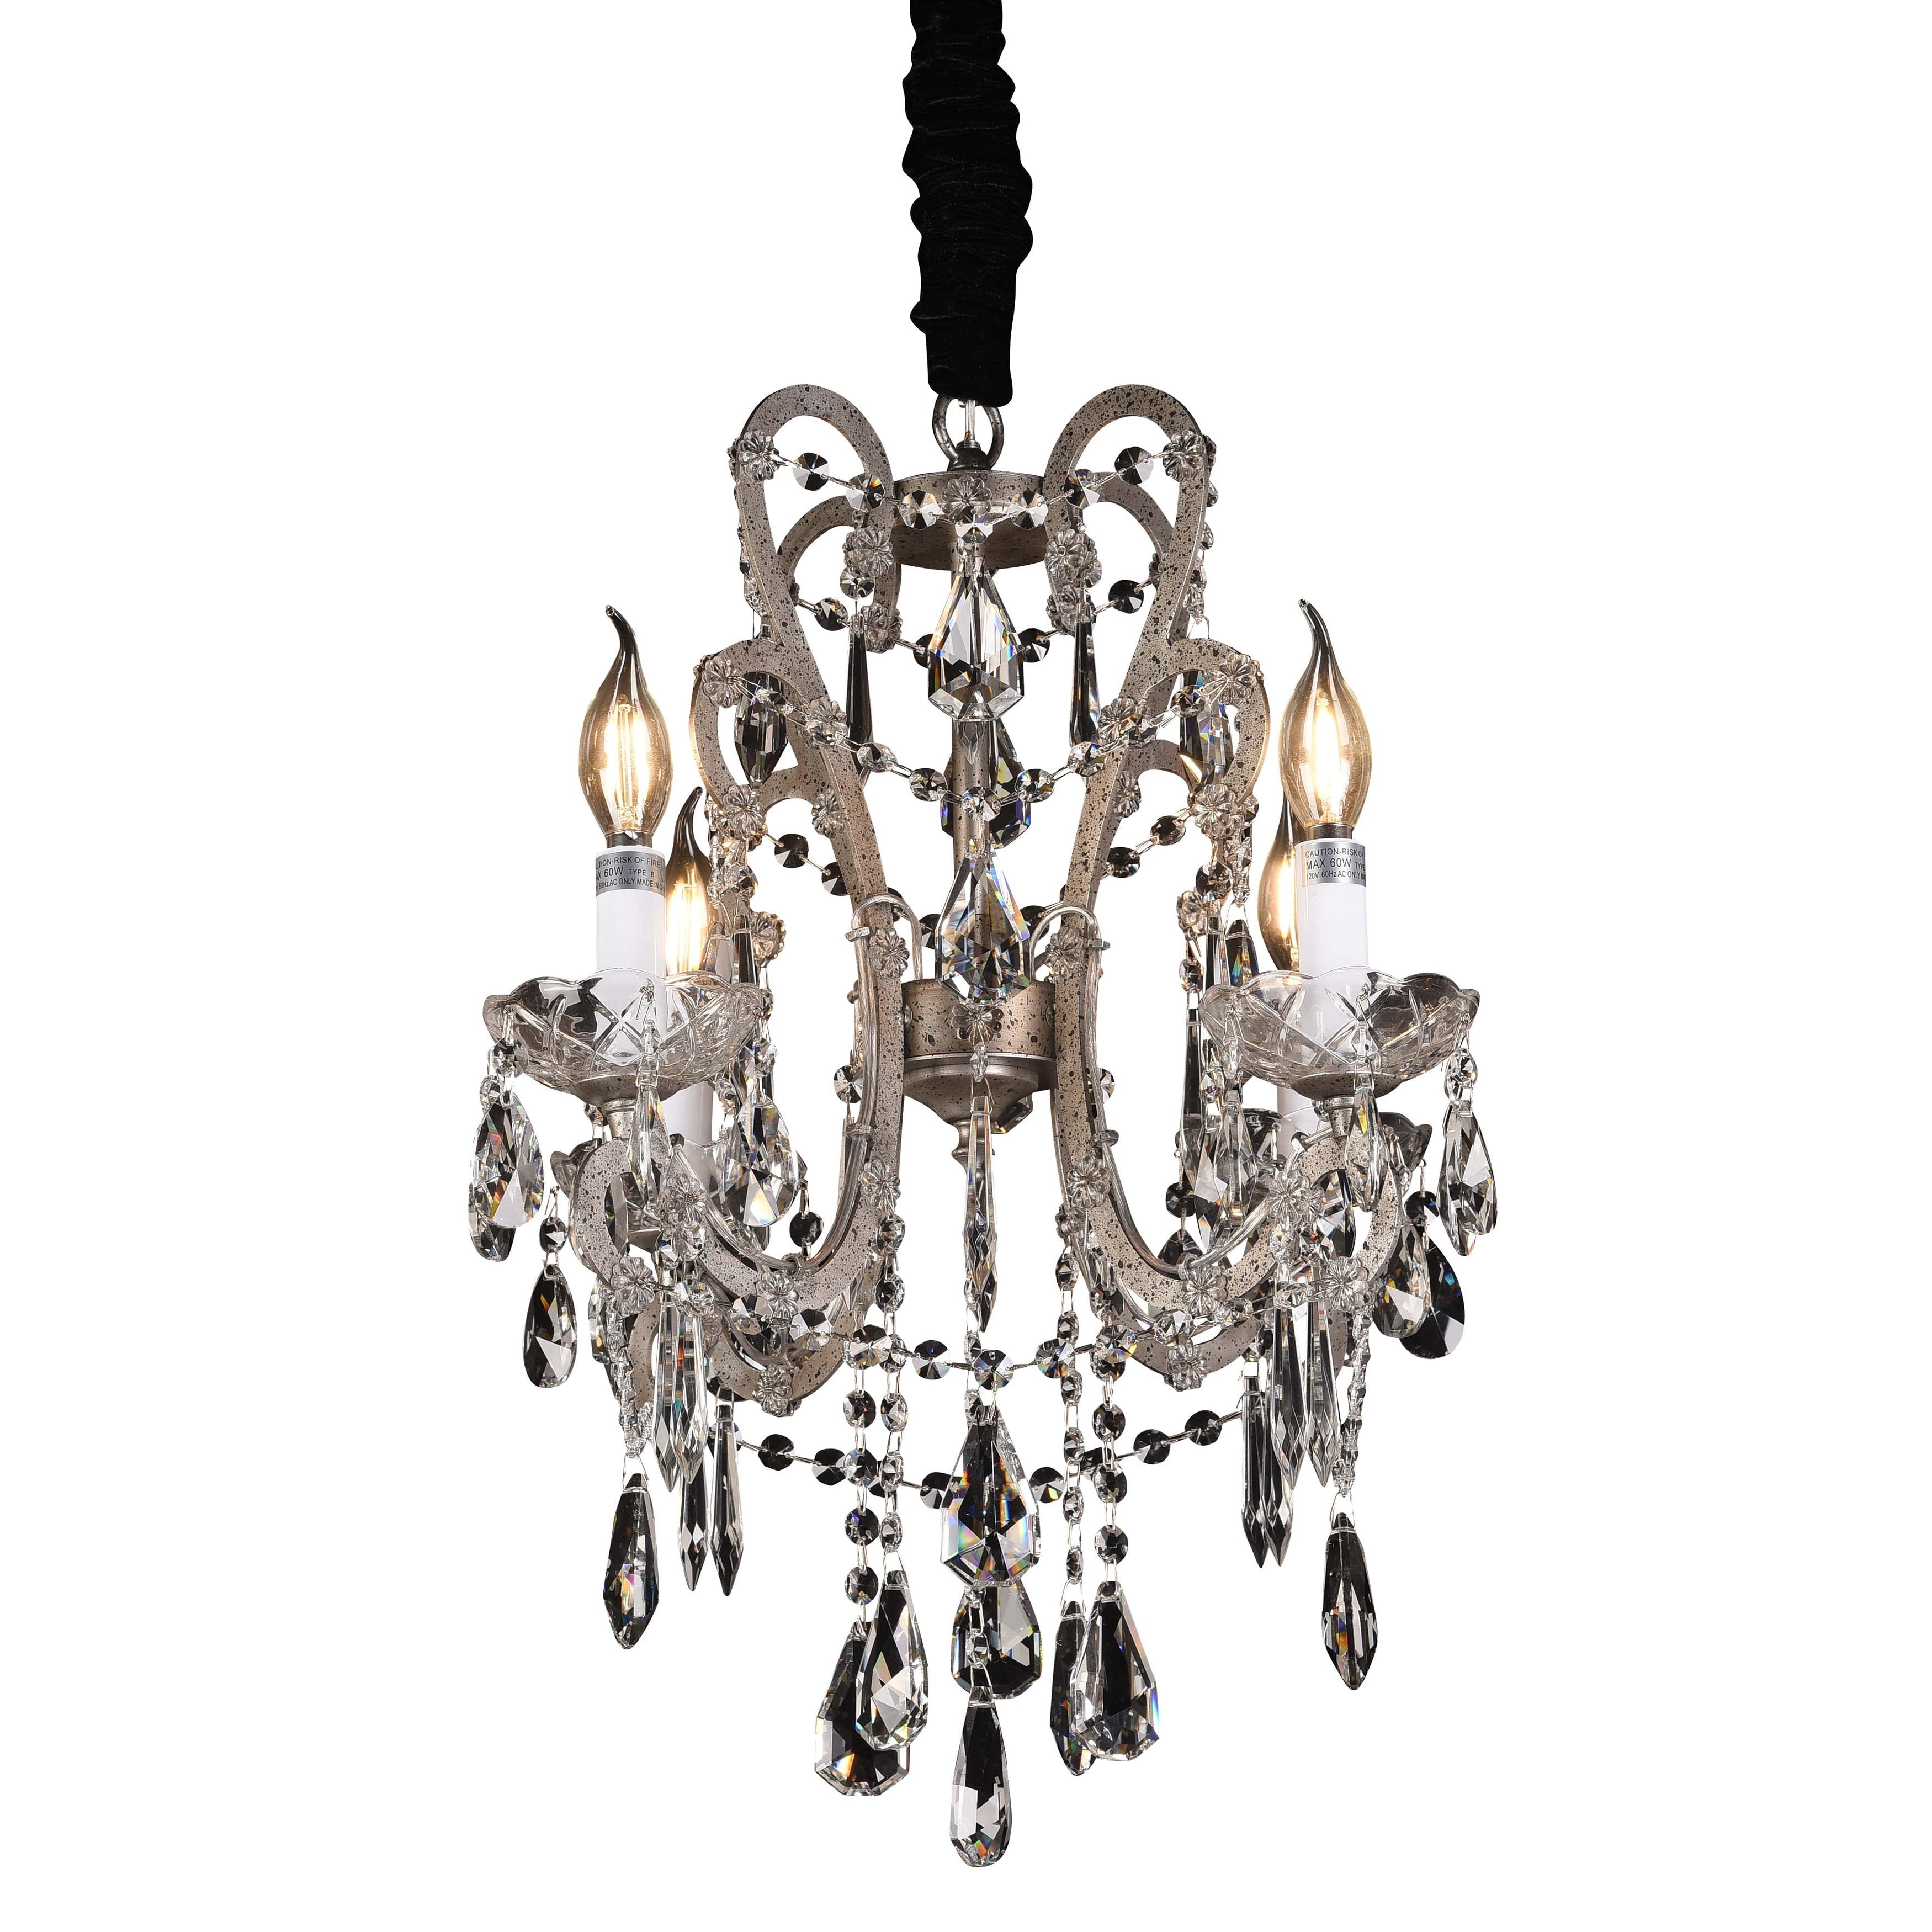 Anabelle Rococo Crystal Chandelier - Italian Concept - Size